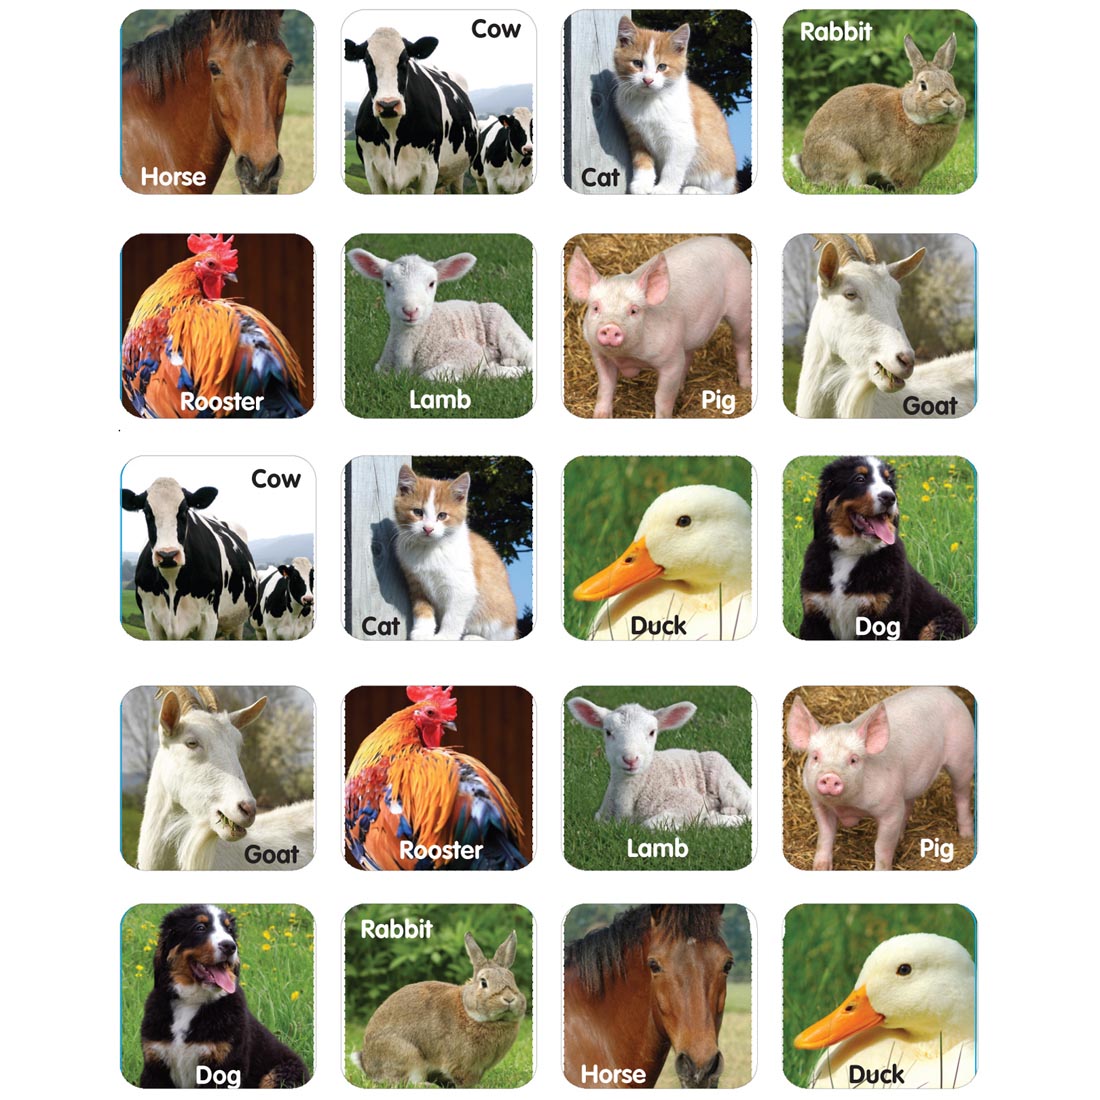 Farm Animals Theme Stickers by Eureka have the animals labeled: Horse, Cow, Cat, Rabbit, etc.